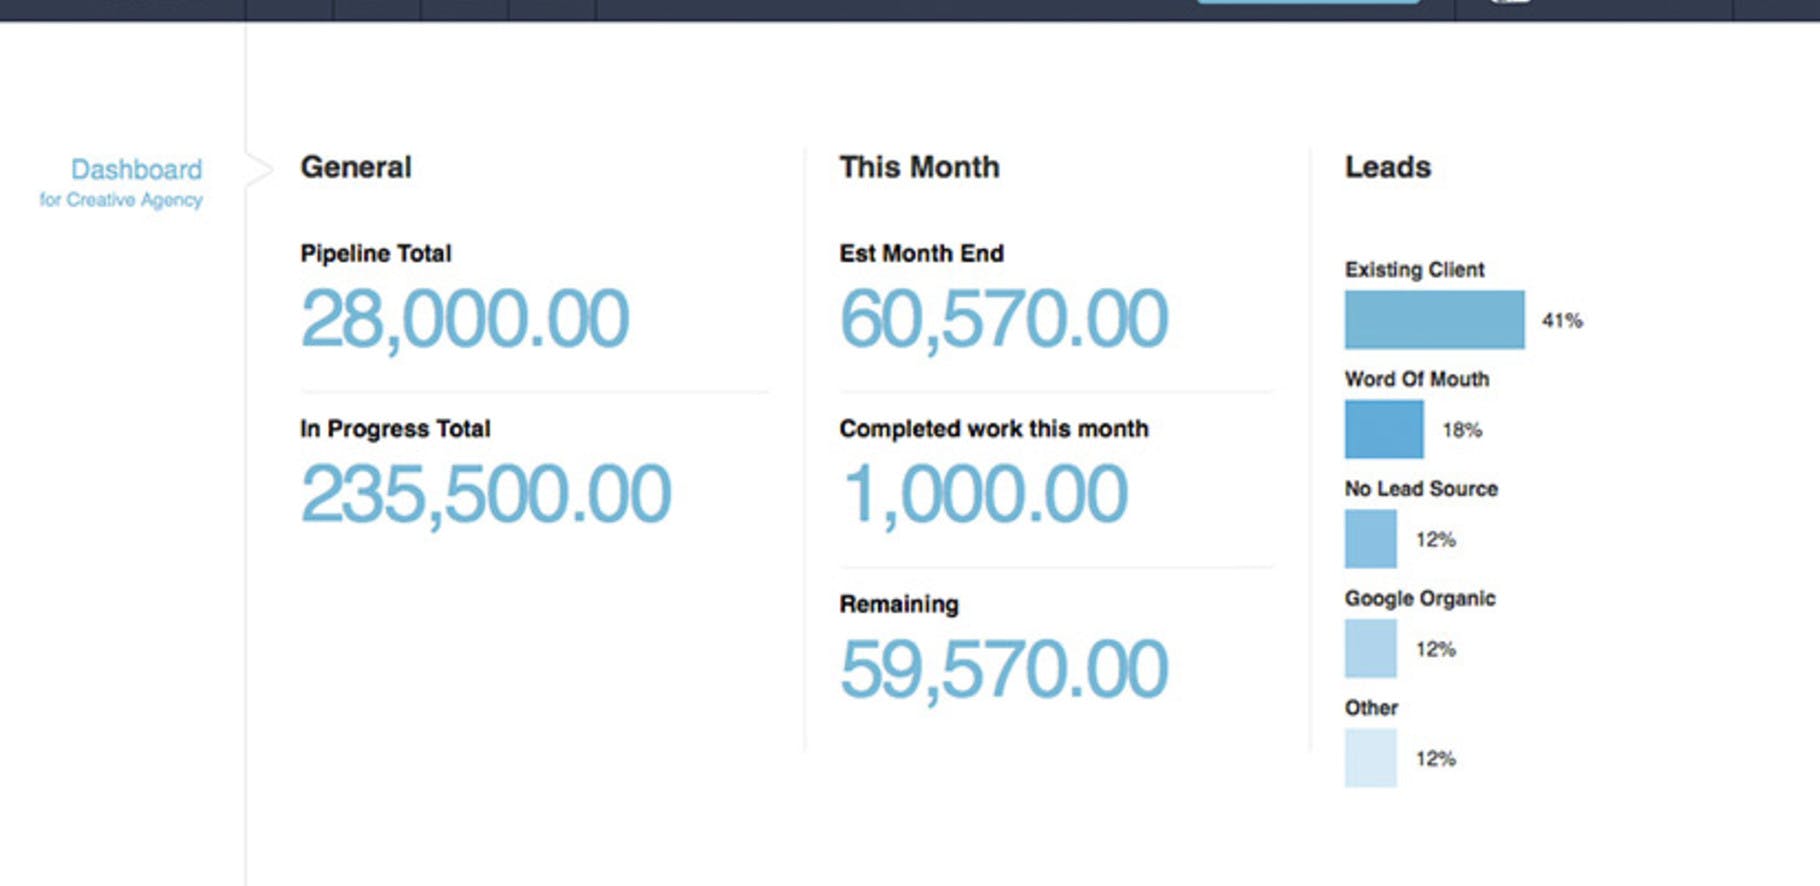 Screenshot of the roll software showing how the system can track your cash flow